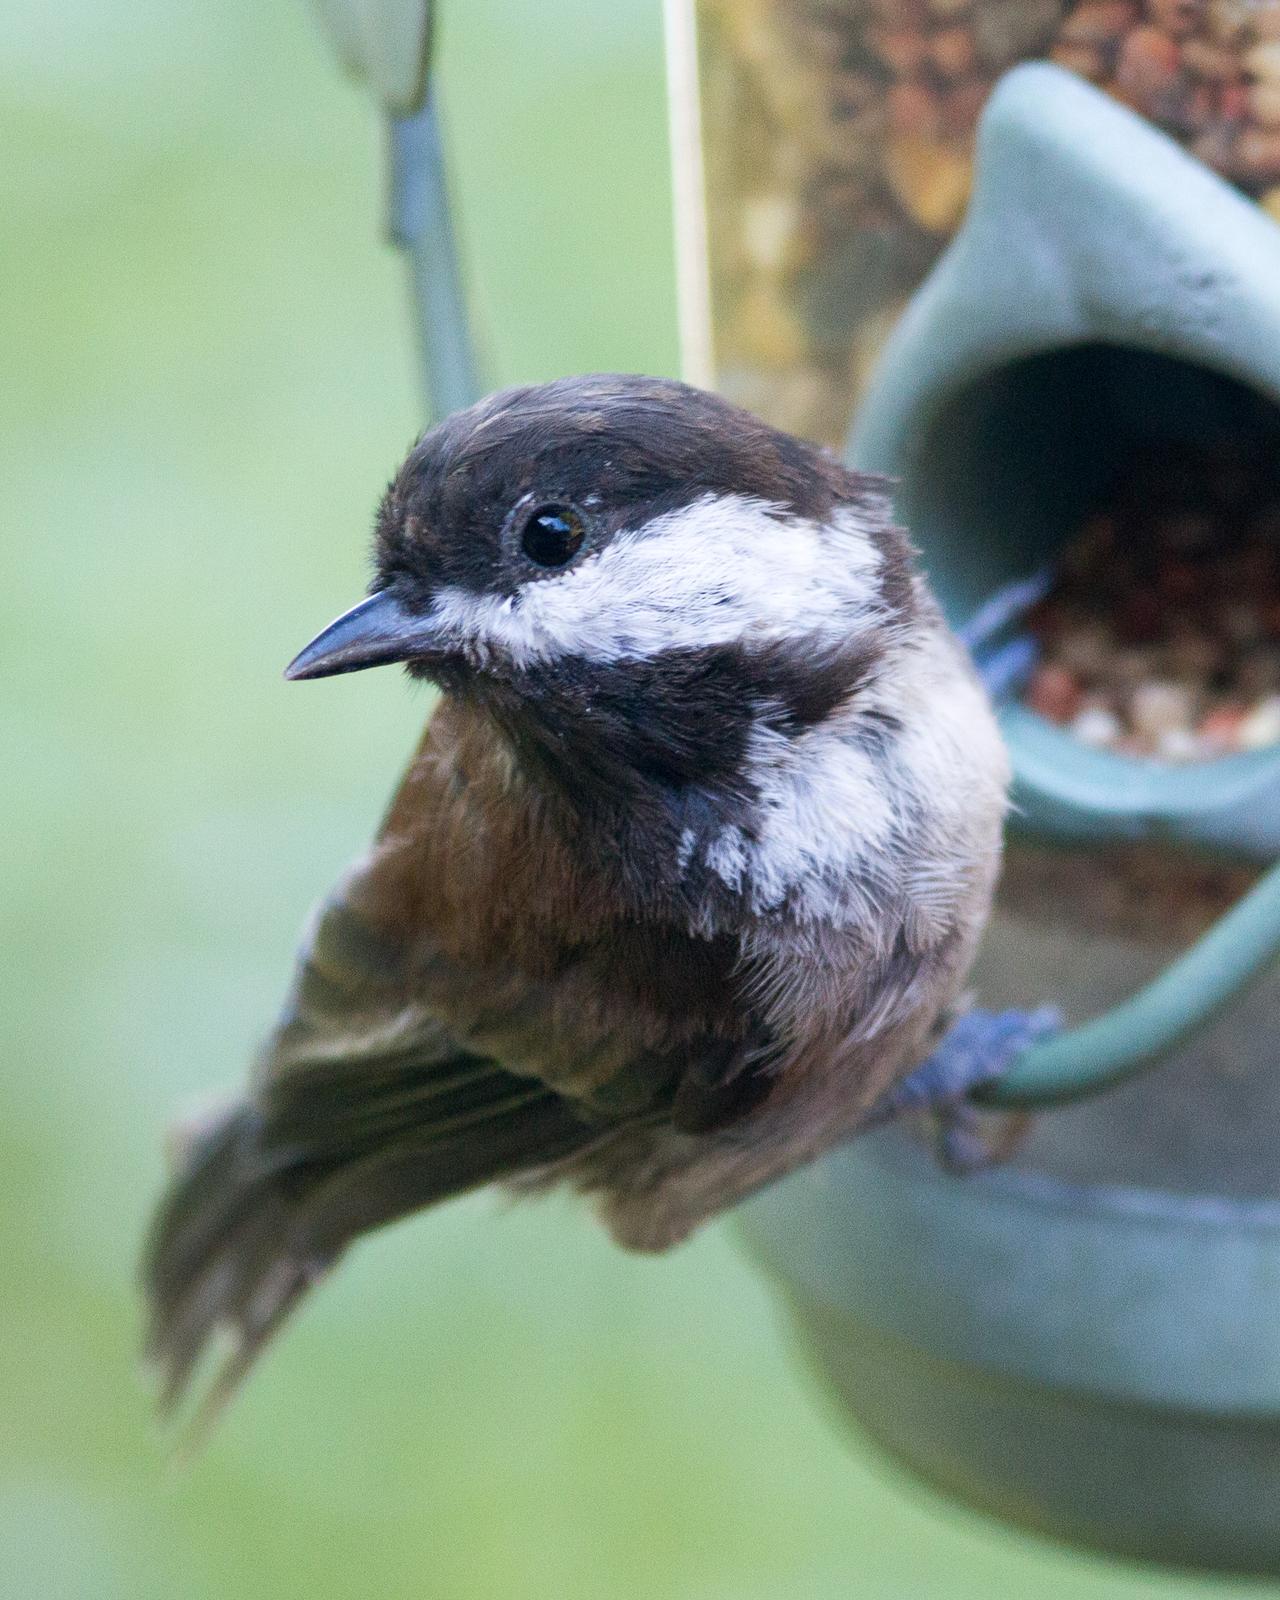 Chestnut-backed Chickadee Photo by Dylan Steinberg